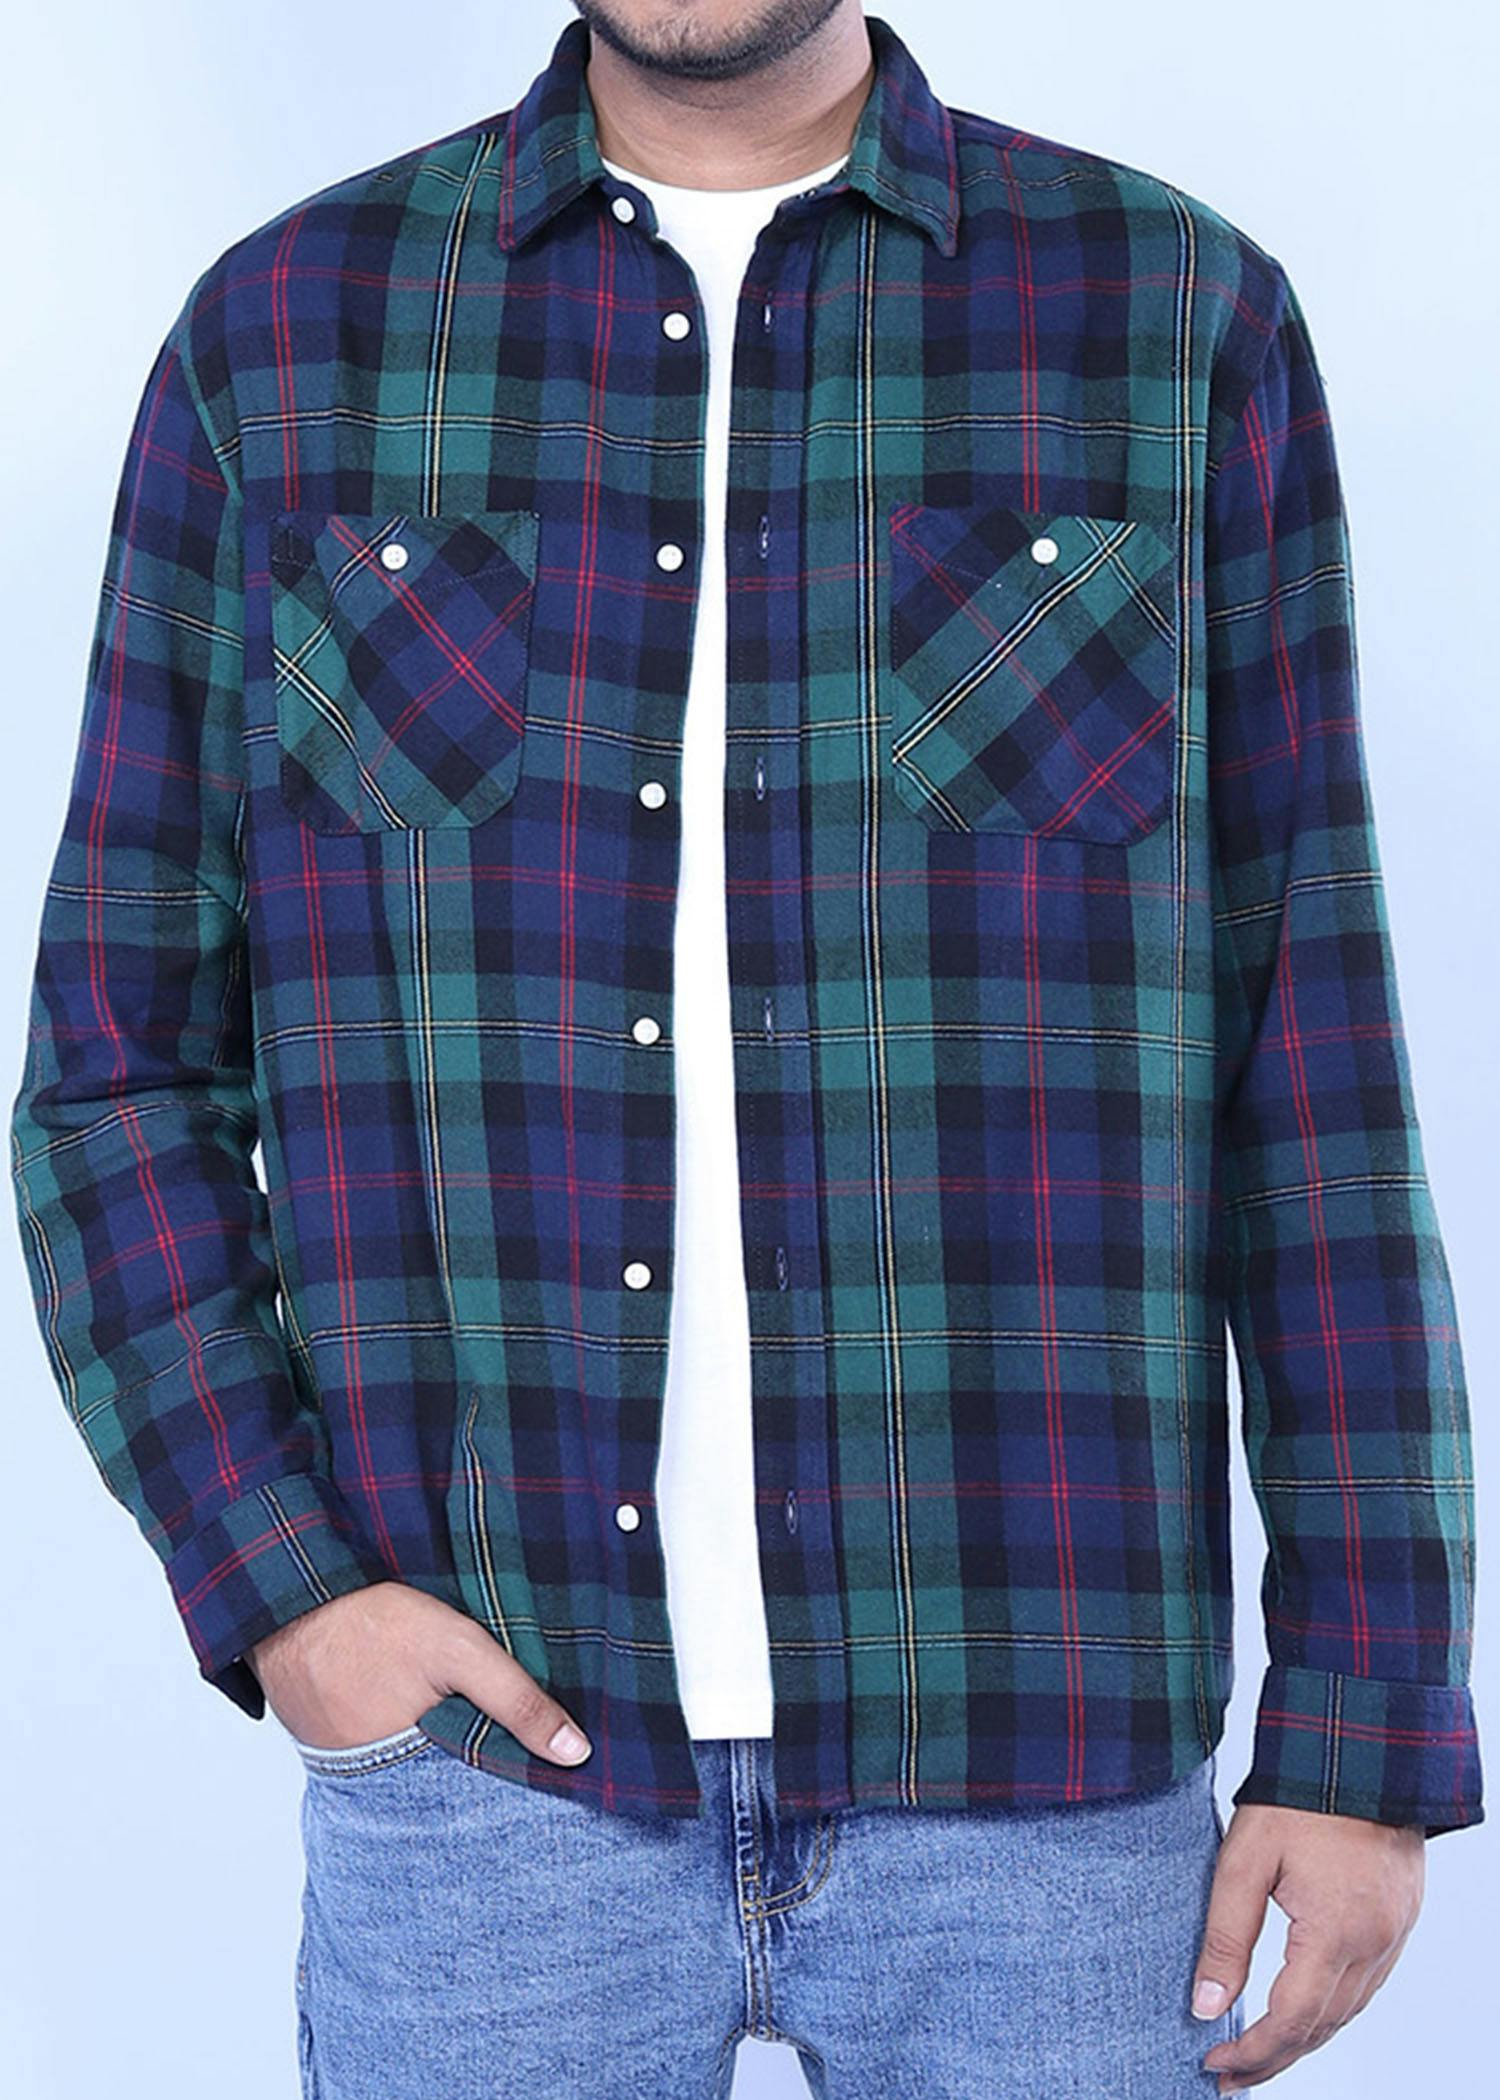 mersin ls flannel shirt green color headcropped